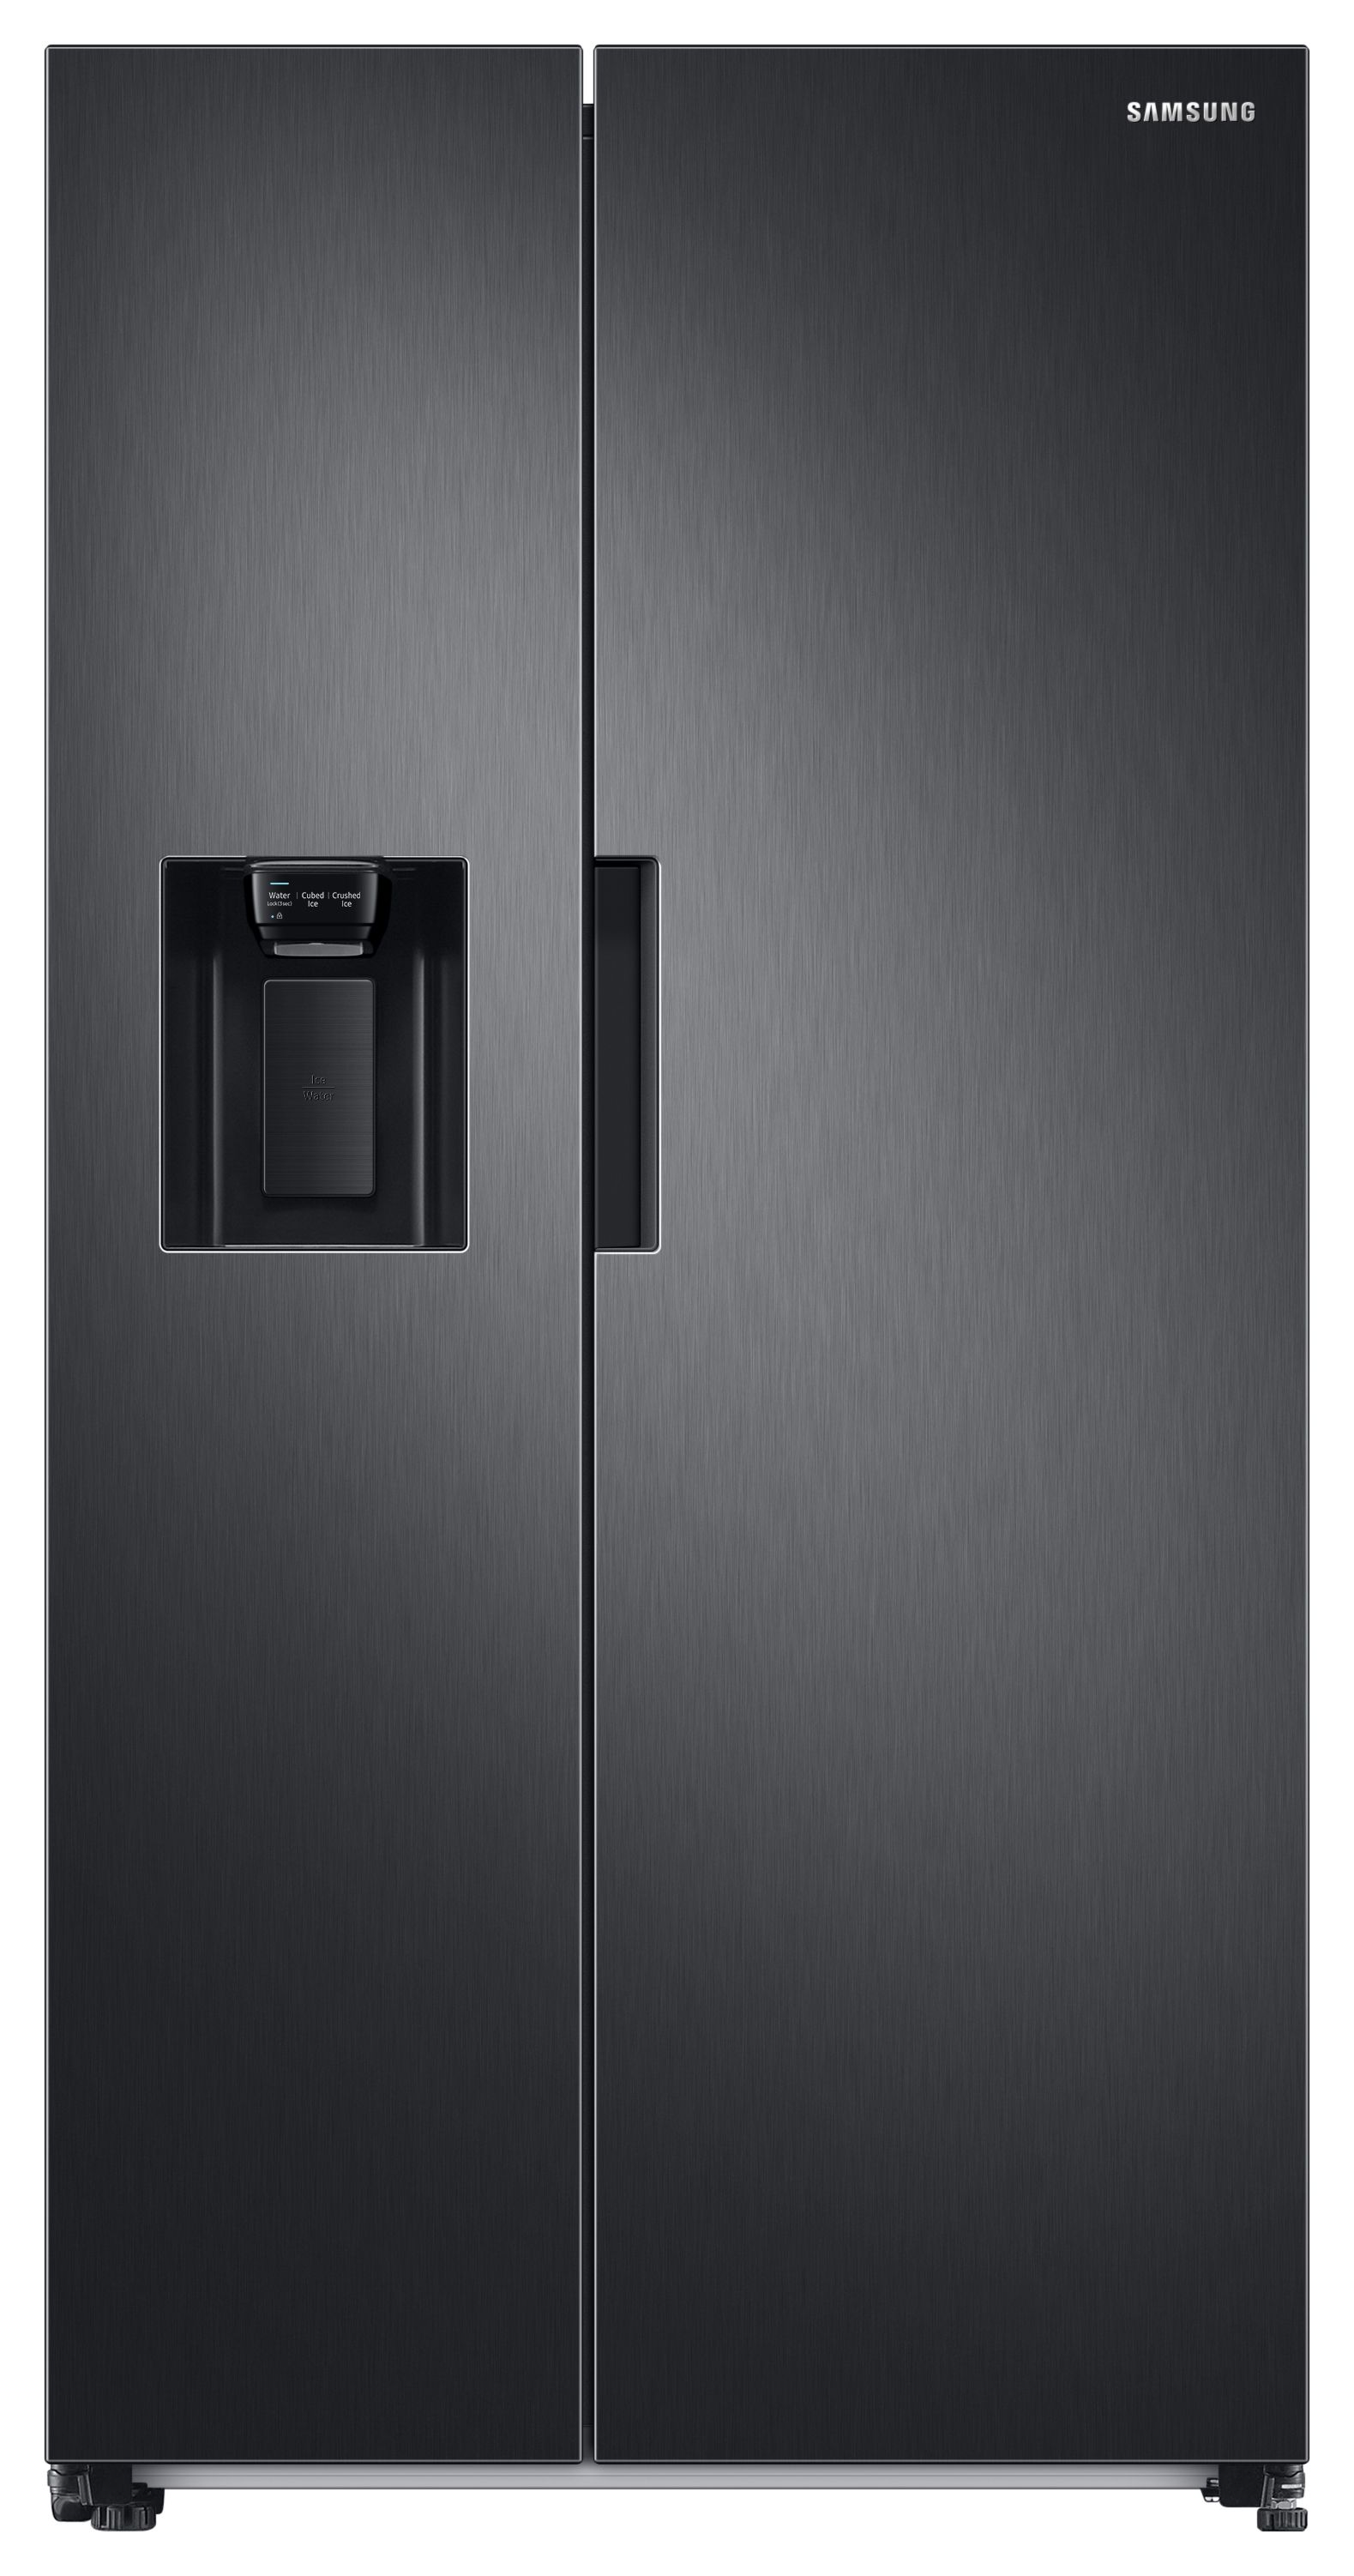 Image of Samsung RS67A8810B1/EU Water & Ice Dispenser F-Rated American Fridge Freezer - Black Stainless